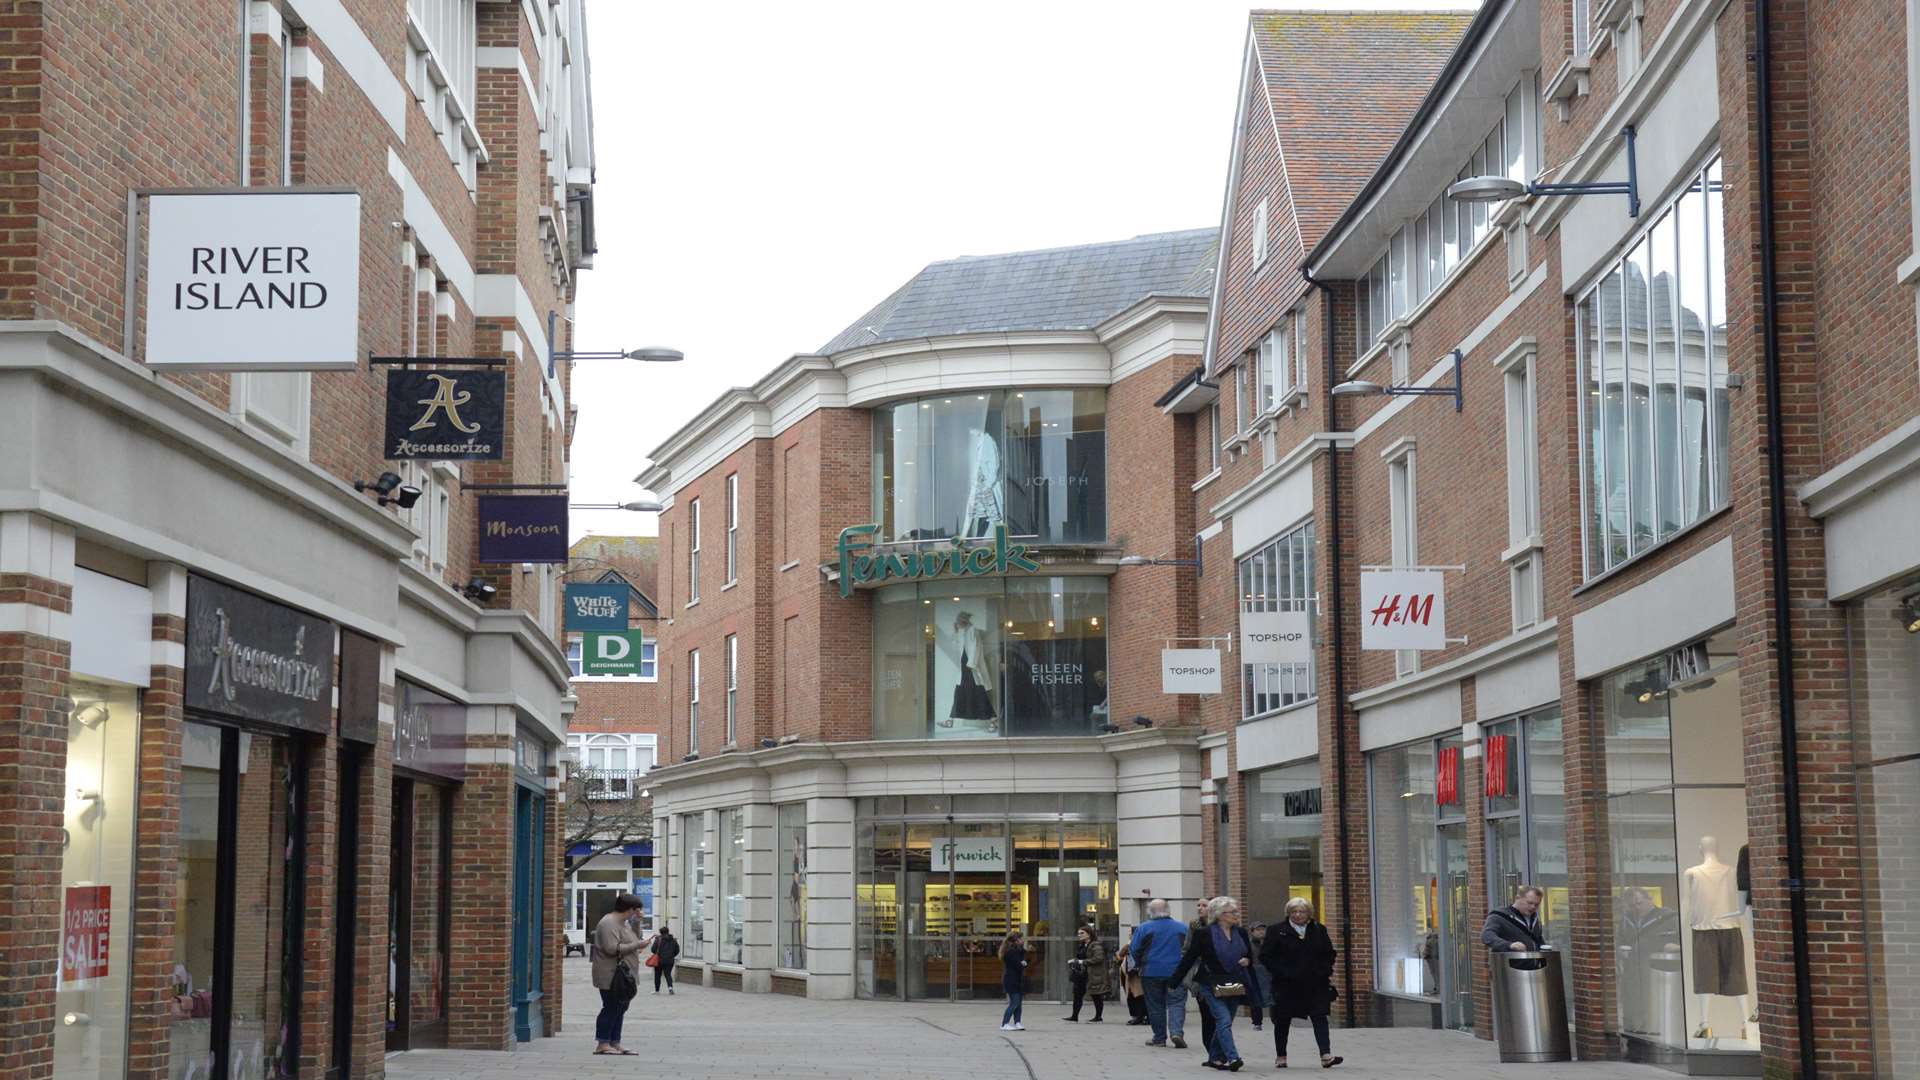 The Whitefriars shopping centre in Canterbury.